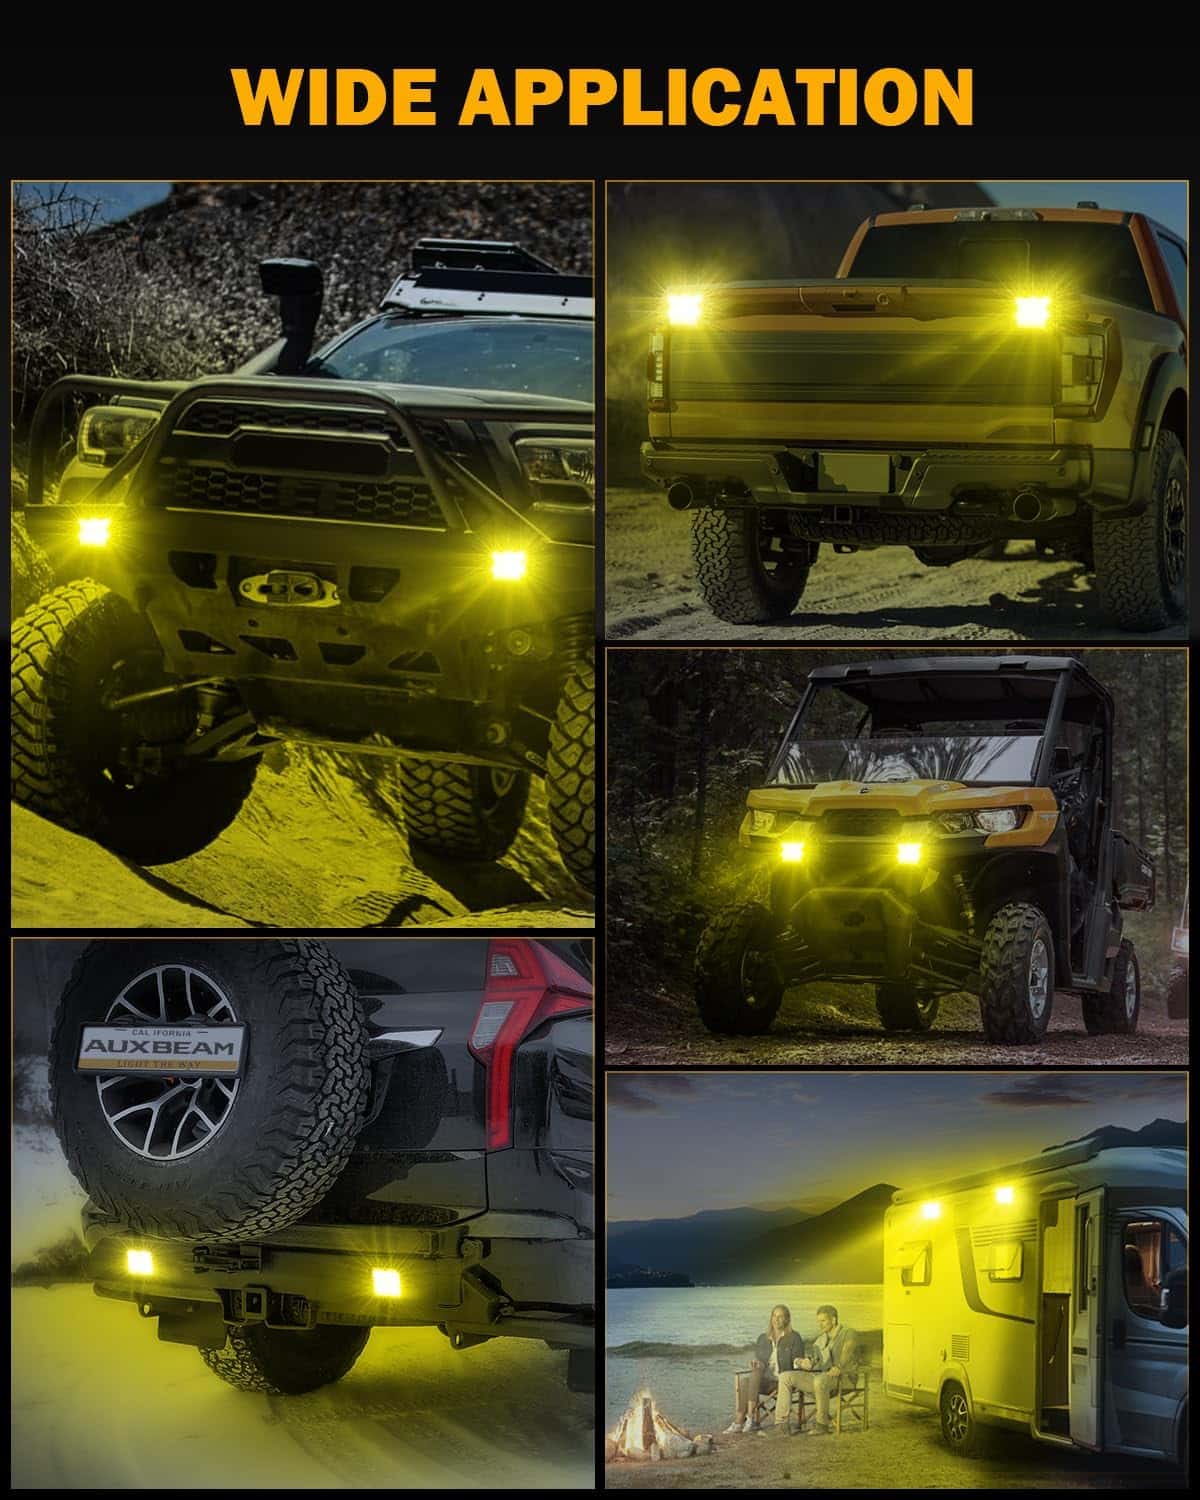 Auxbeam 3.5 Inch Amber LED Pods Light, 40W Flush Mount Flood Offroad Driving Cube Lights Fog Yellow Reverse Light Backup Lights Motorcycle Taillights with Wiring Harness Kit - 2 Lead